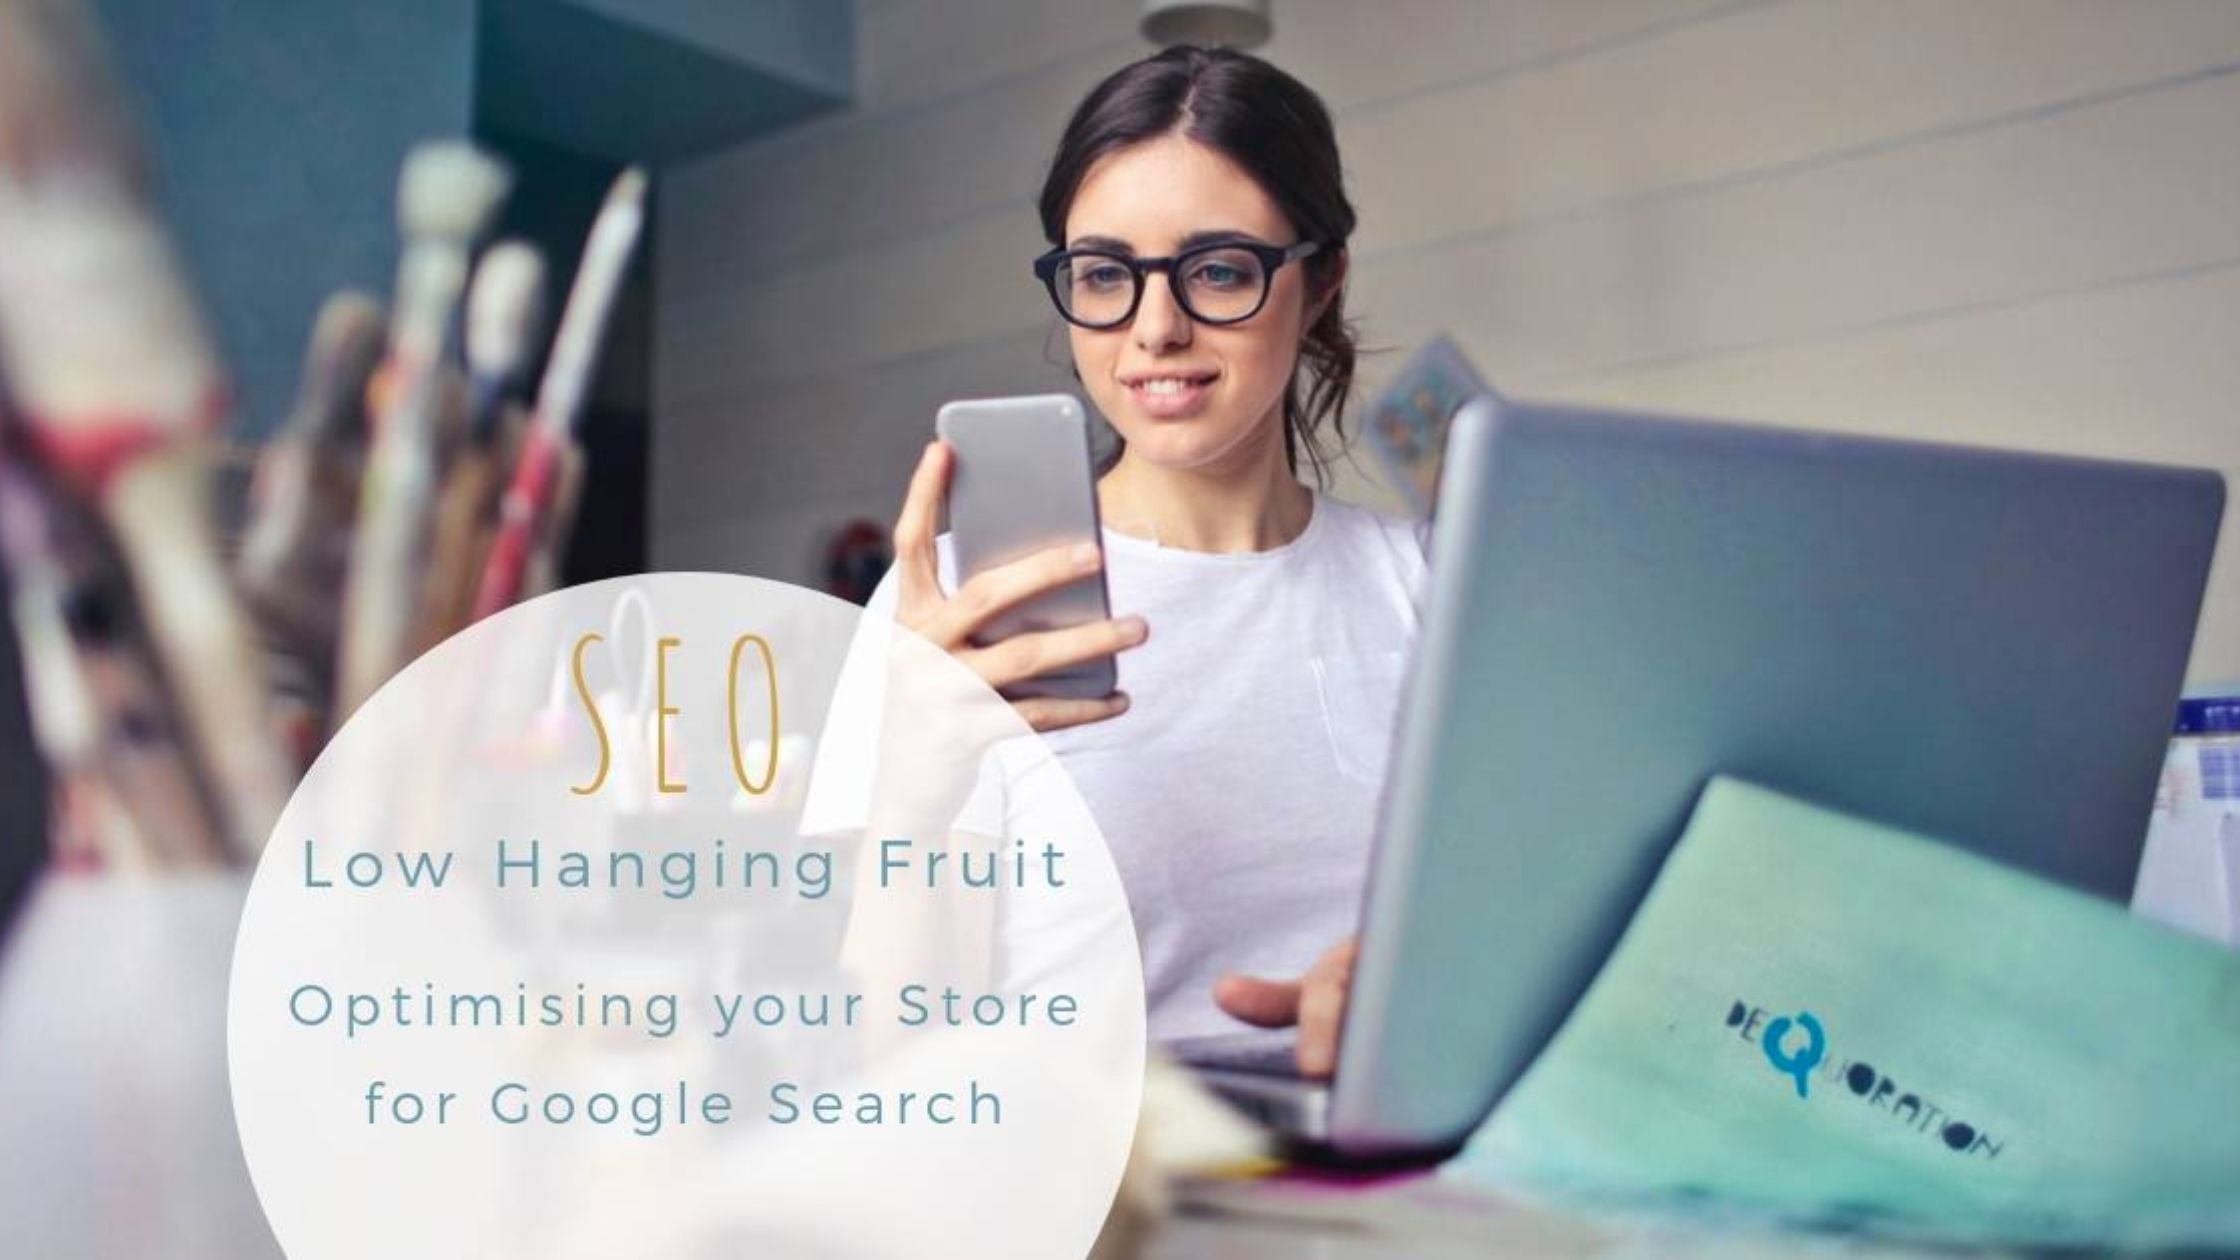 SEO Low Hanging Fruit: Optimising Your Store for Google Search